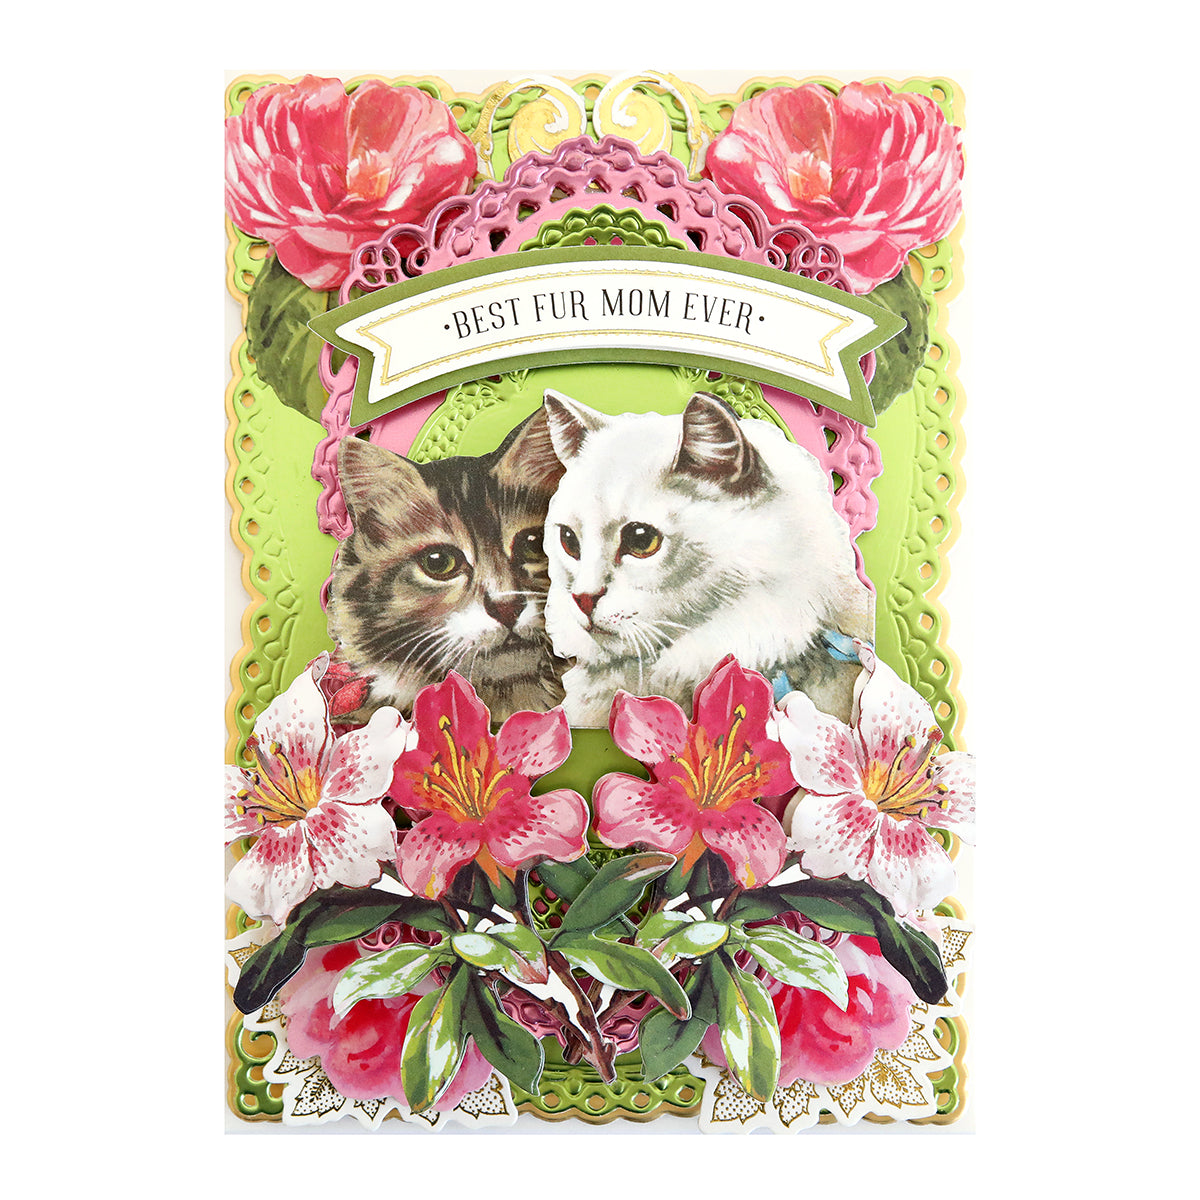 Greeting card with "best fur mom ever" sentiments, featuring an illustration of two cats surrounded by Fur Baby Cat Stickers and Sentiments.